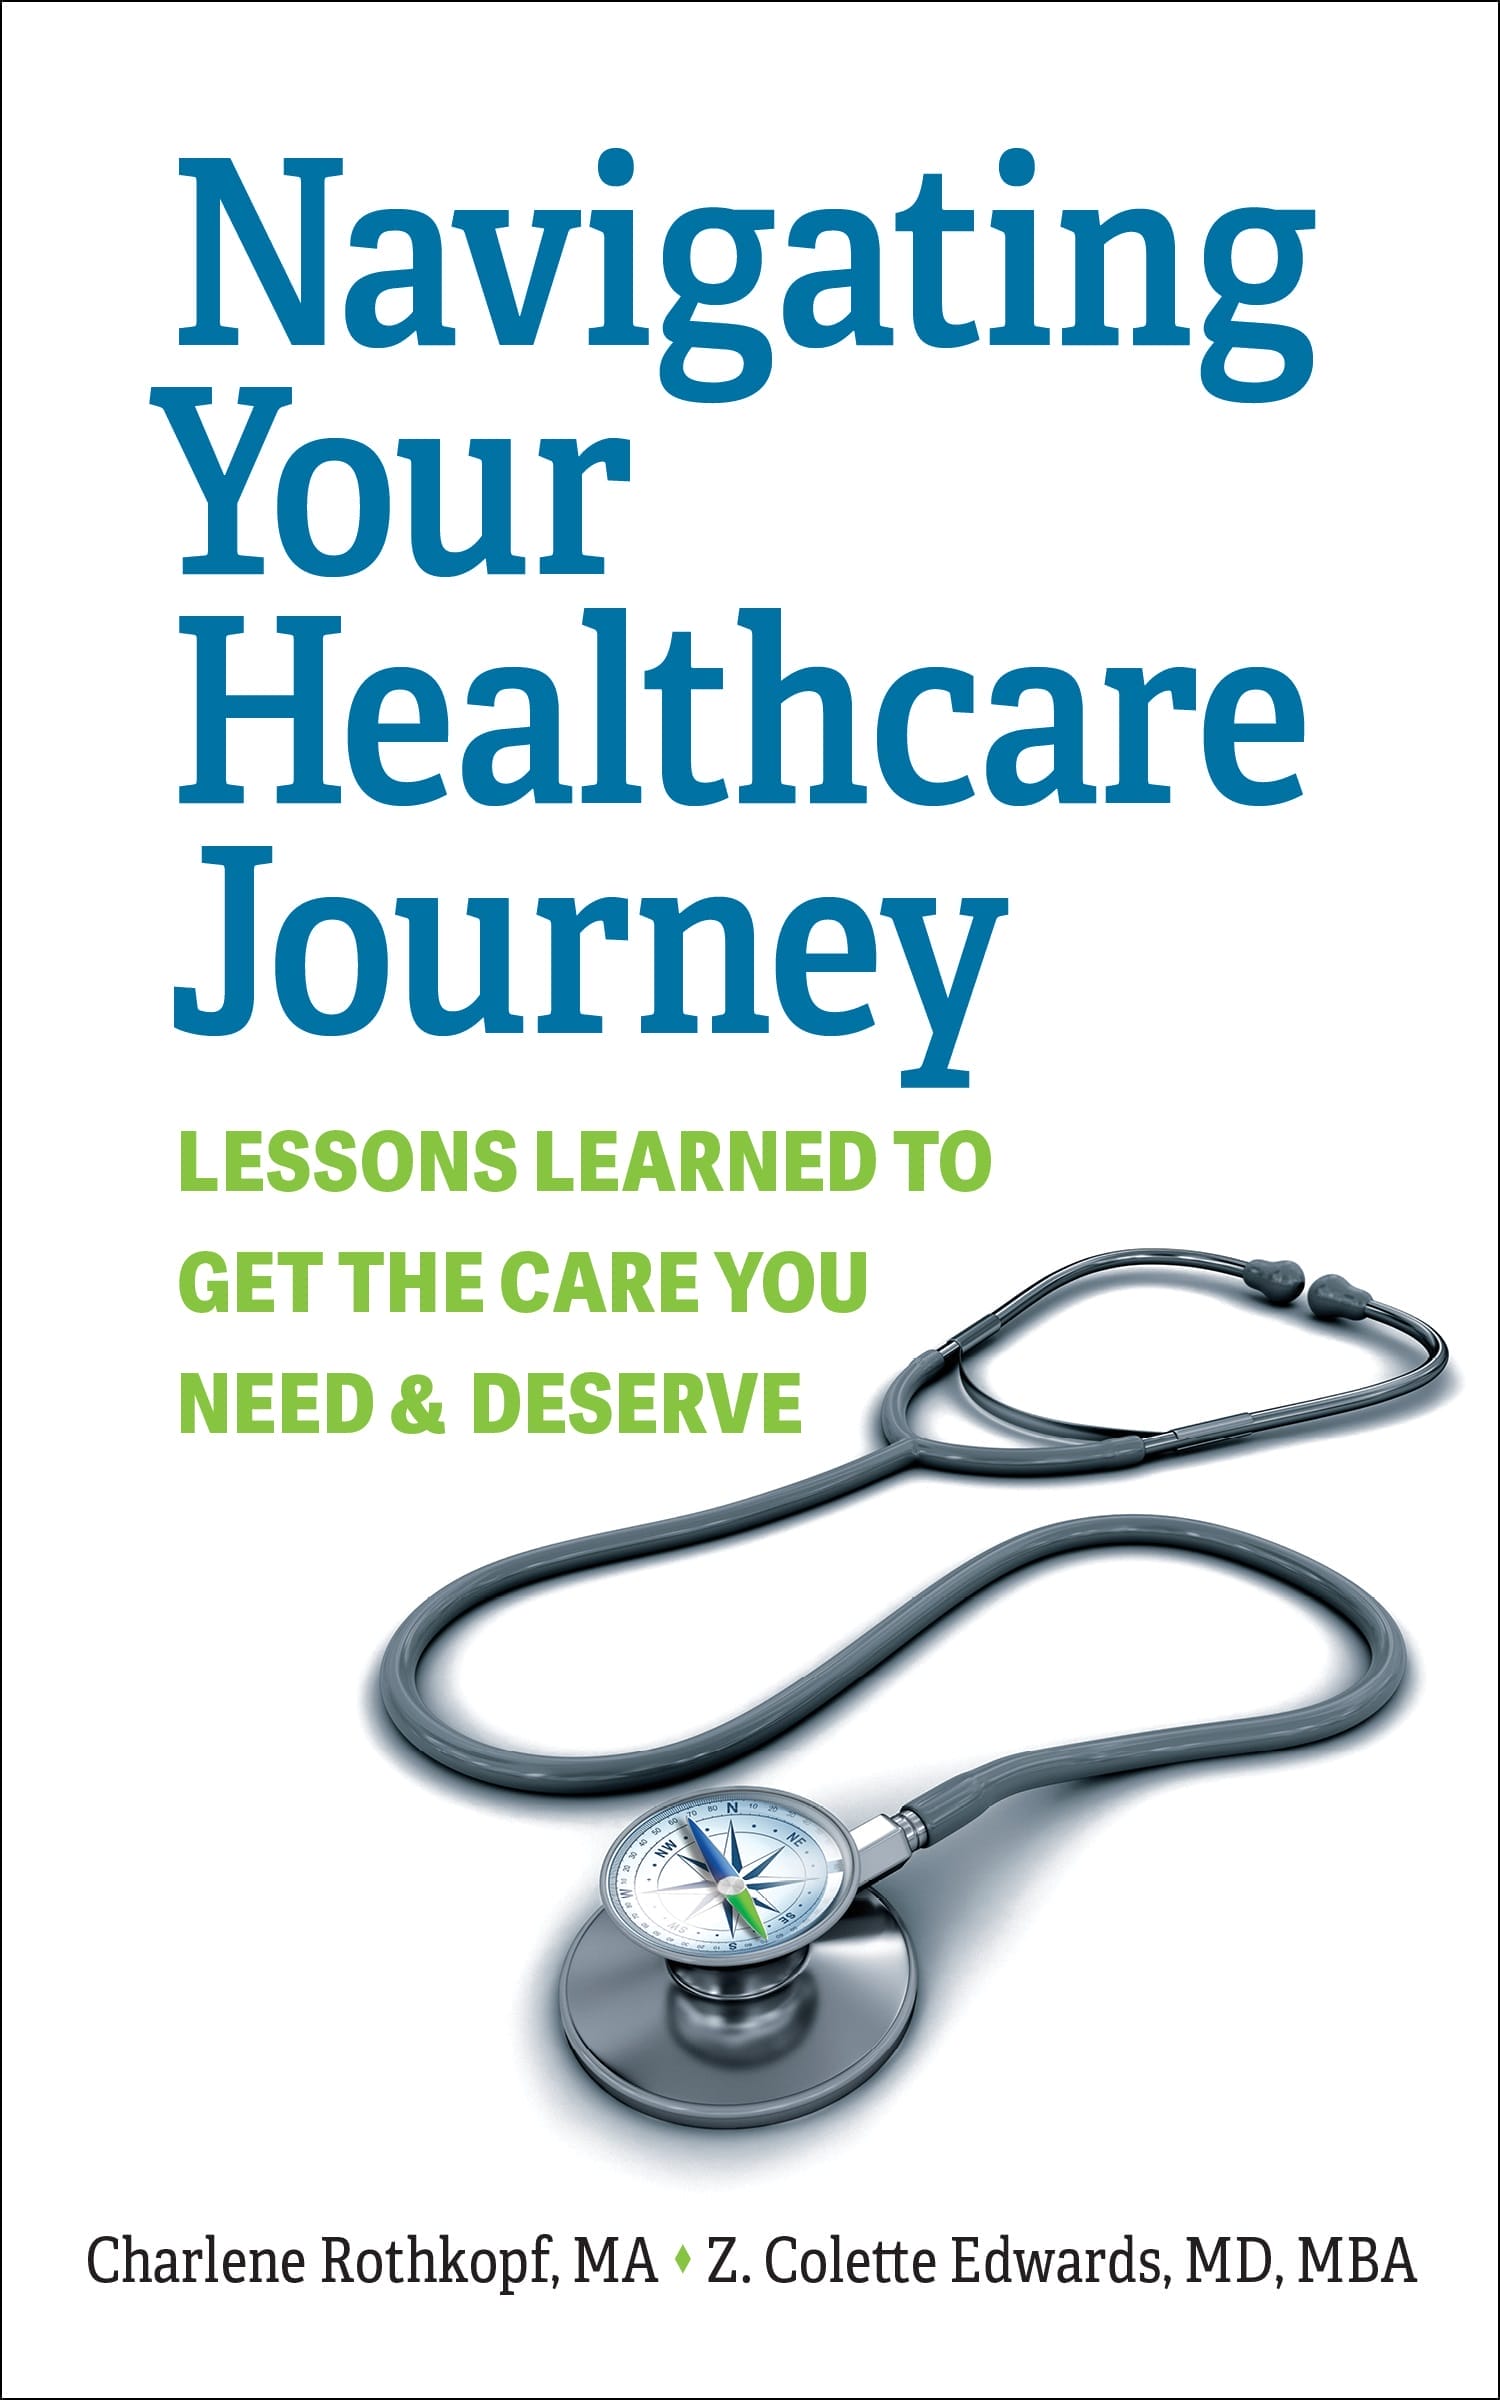 Cover for book titled Navigating Your Healthcare Journey.